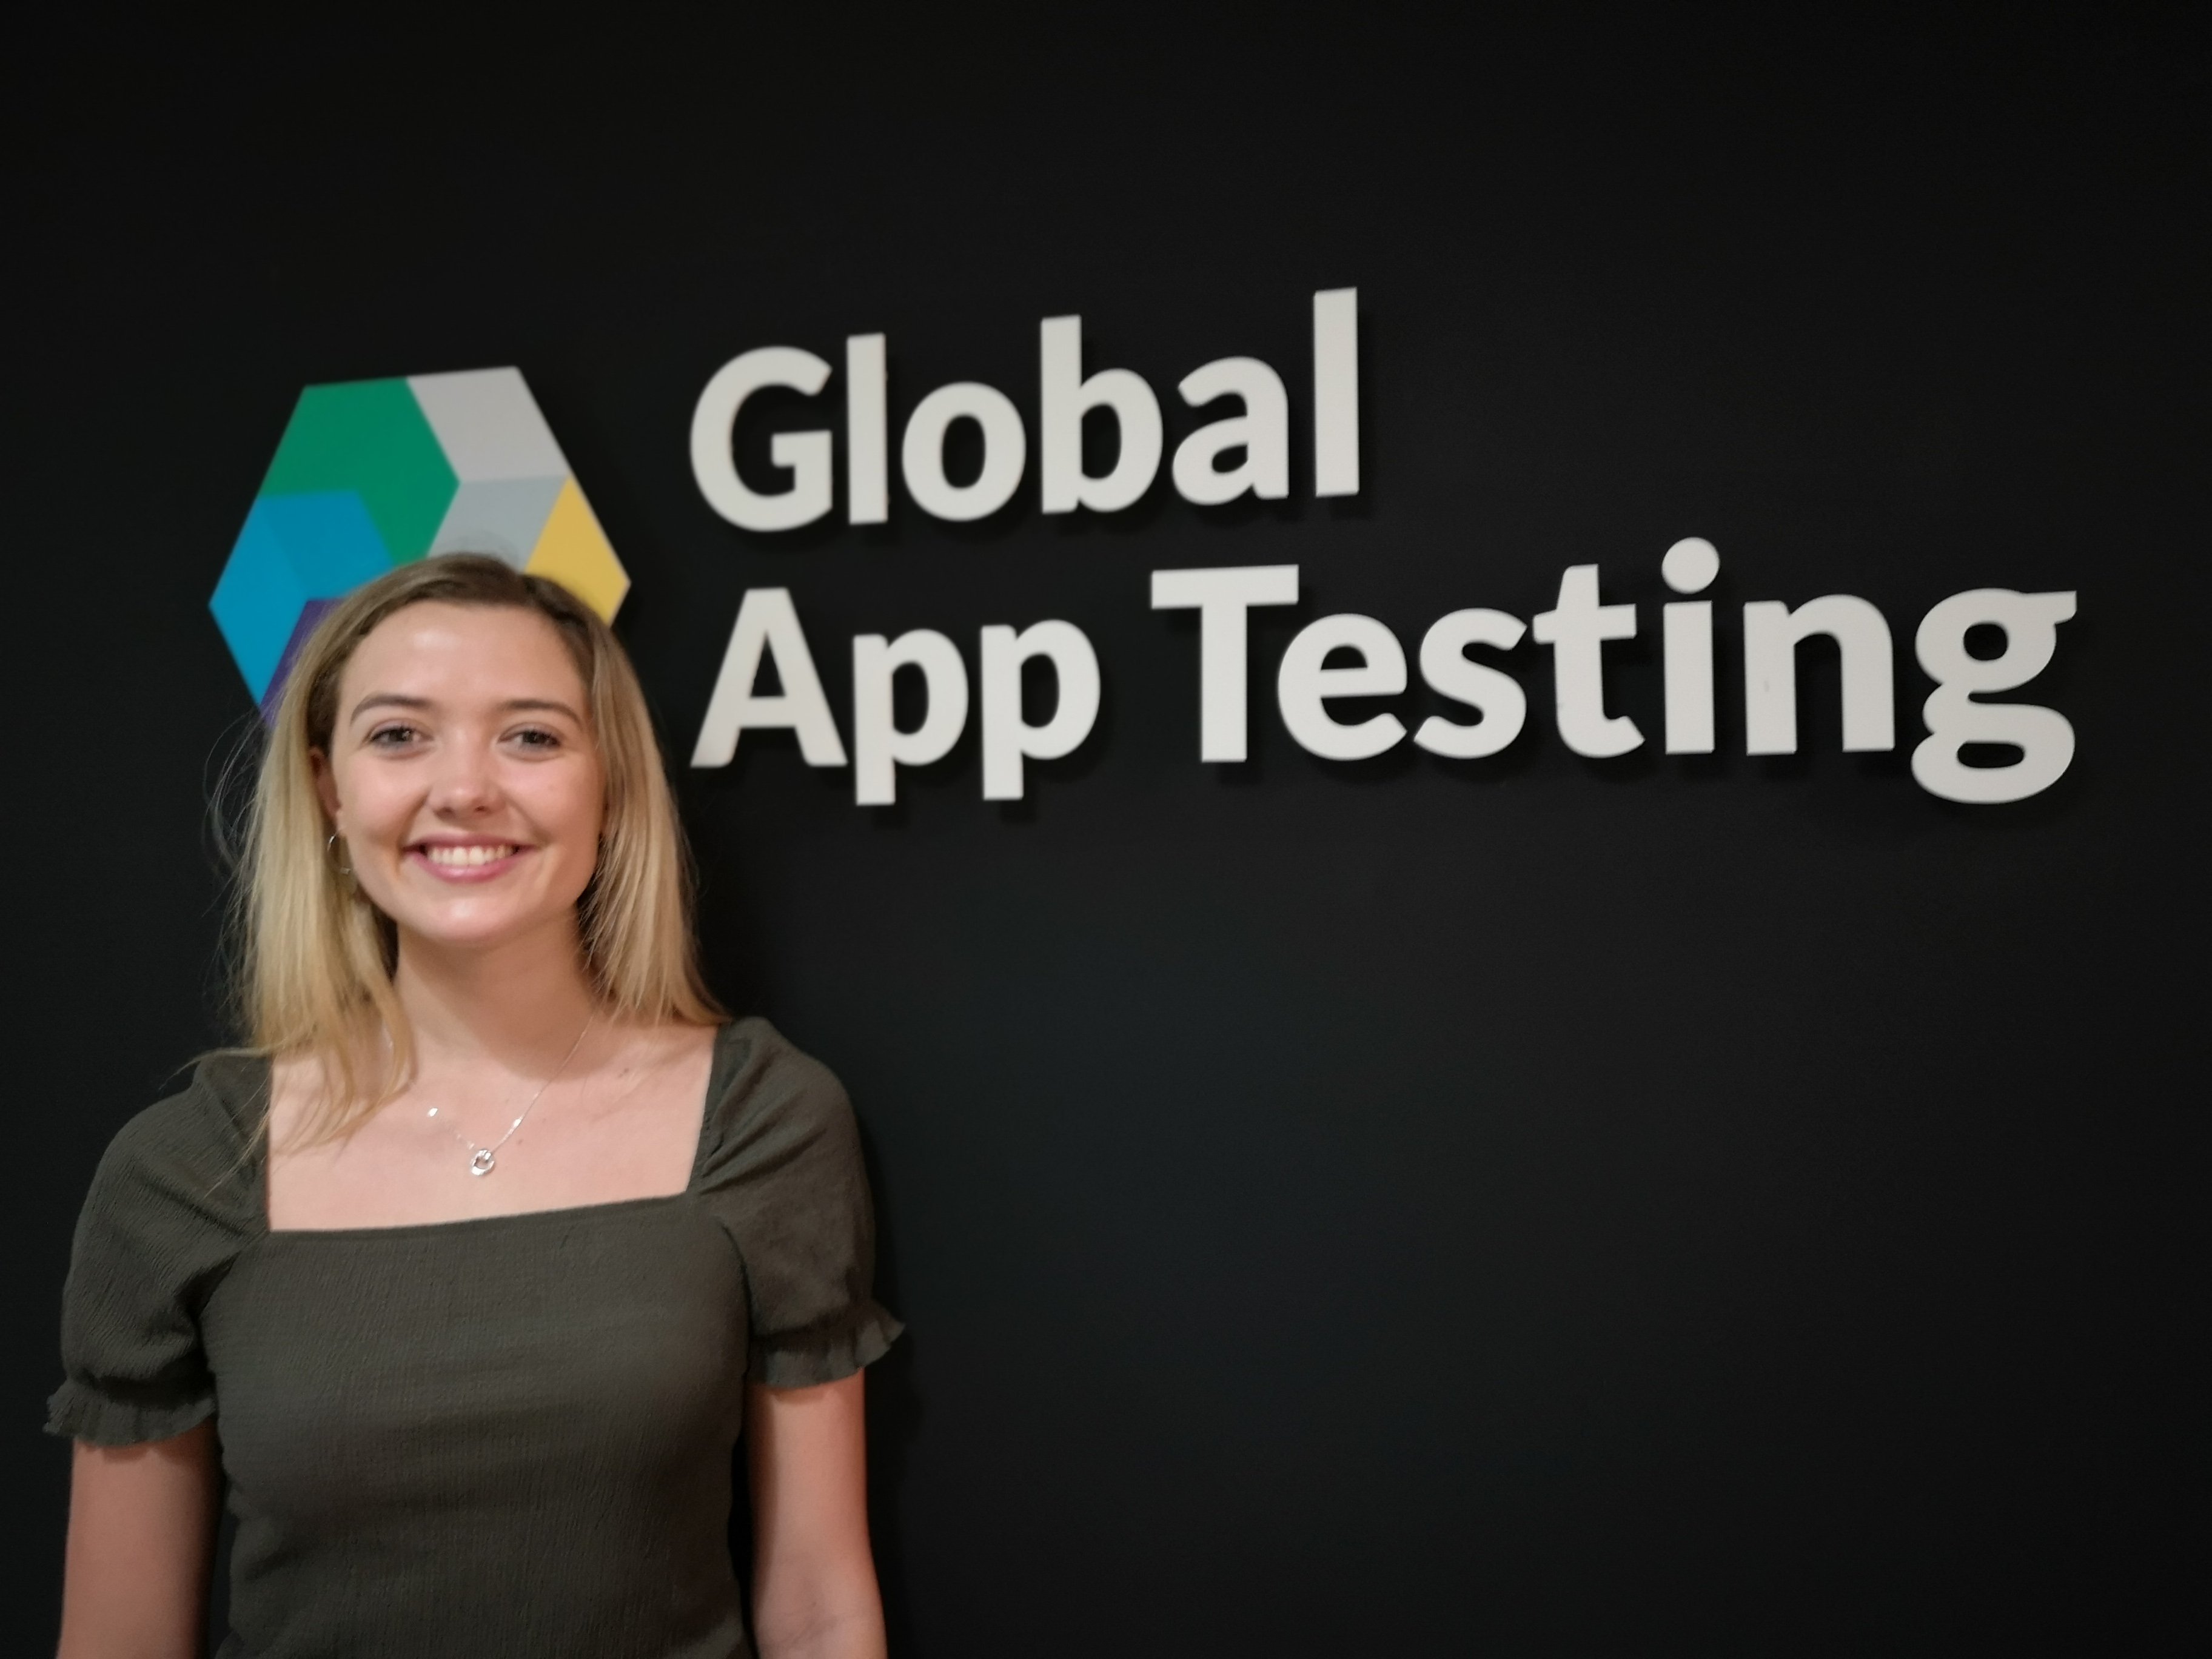 What is automated QA testing? post written by Amelia Whyman